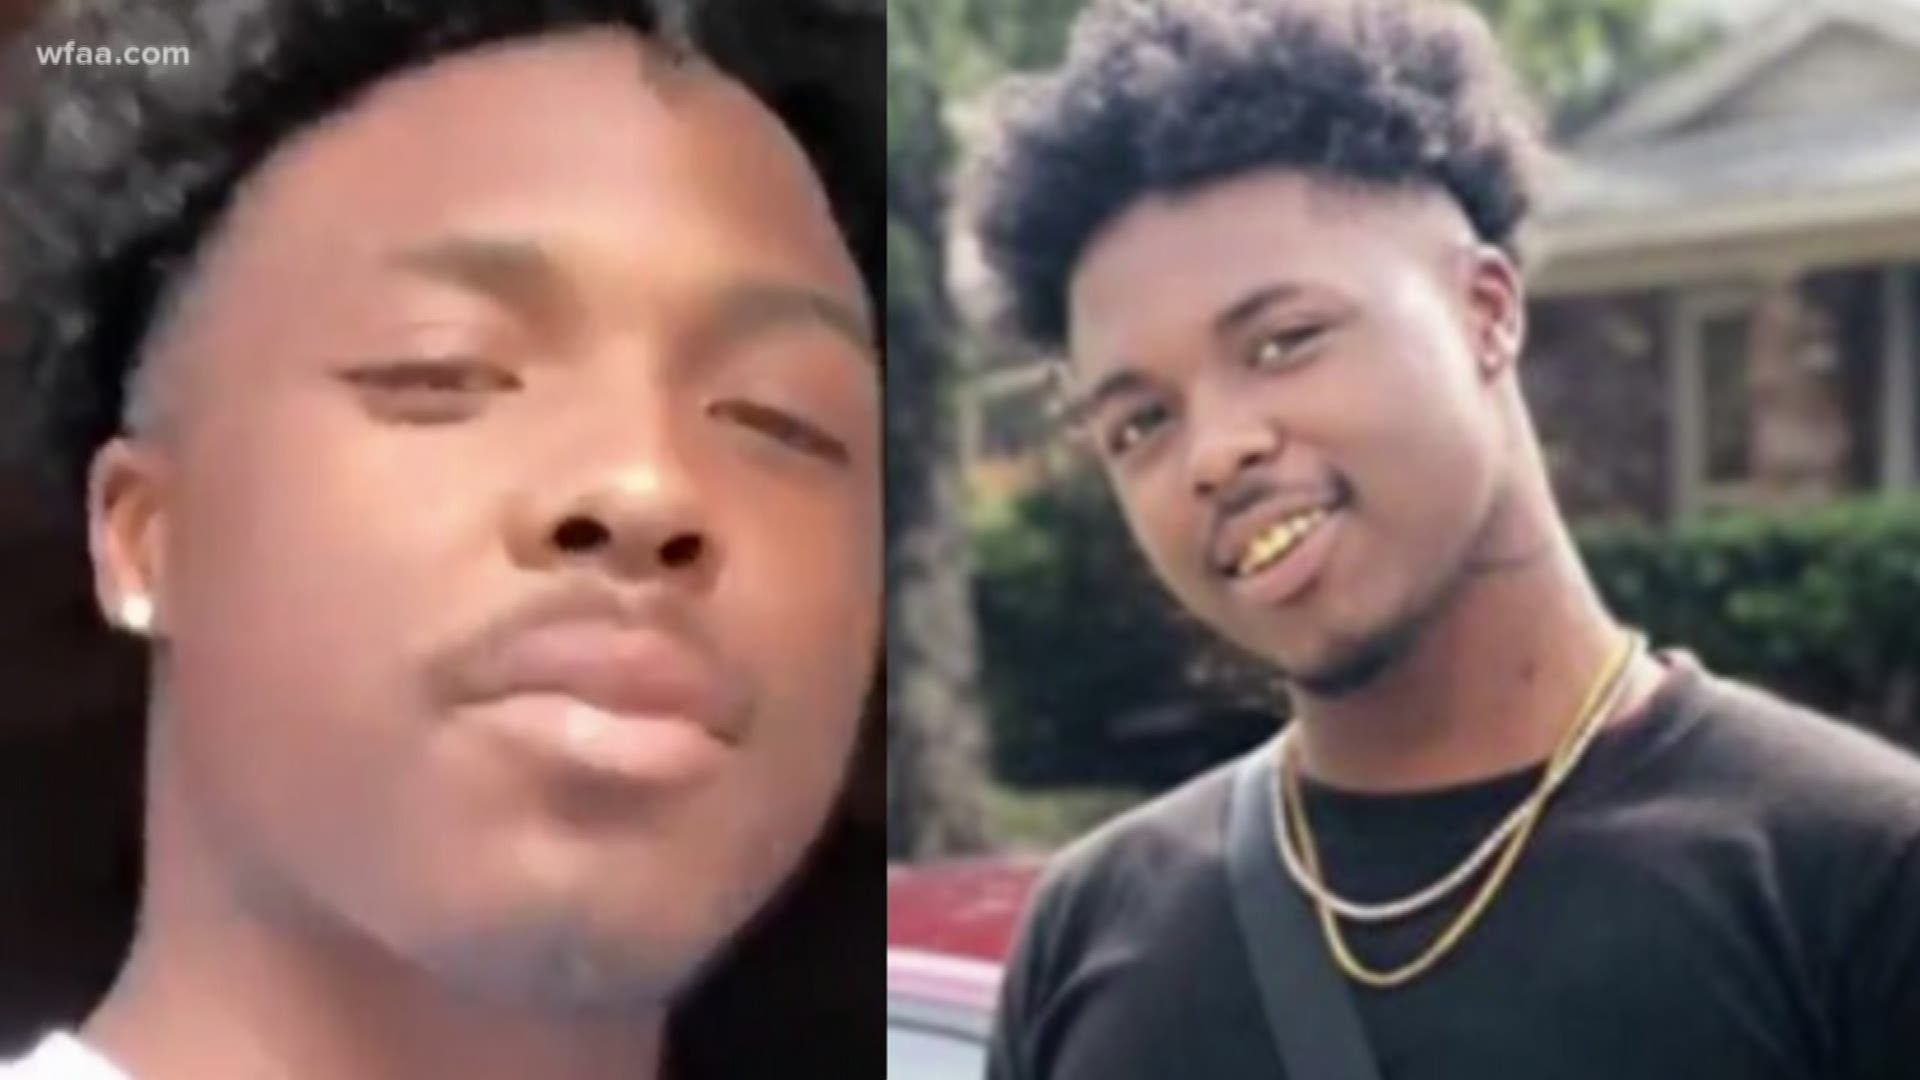 Fort Worth officers said they feared for their lives when they shot and killed JaQuavion Slaton, 20.